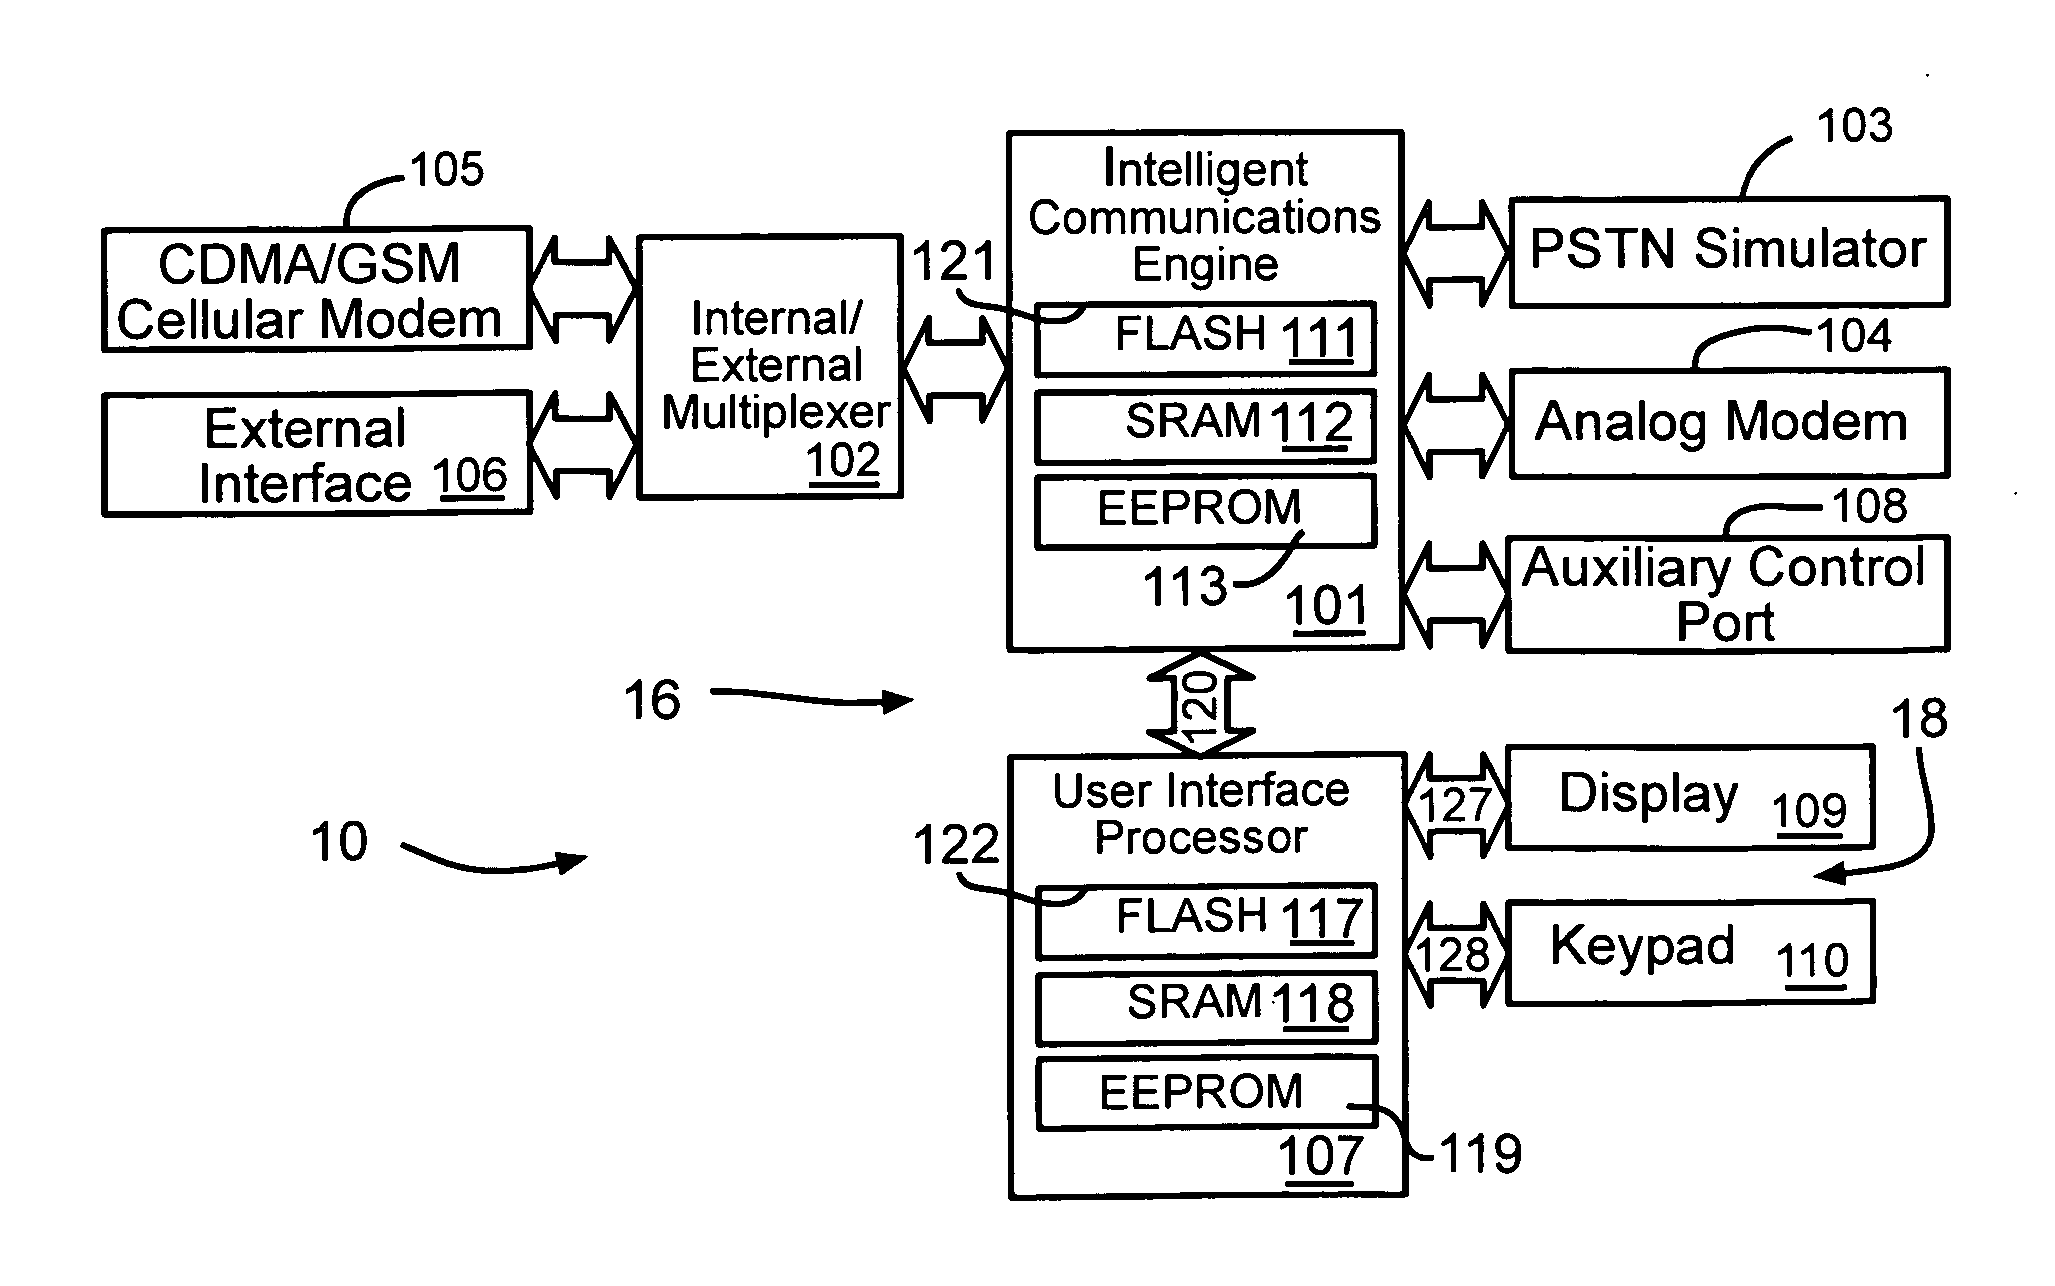 Intelligent bridge between PSTN and asynchronous communication channel